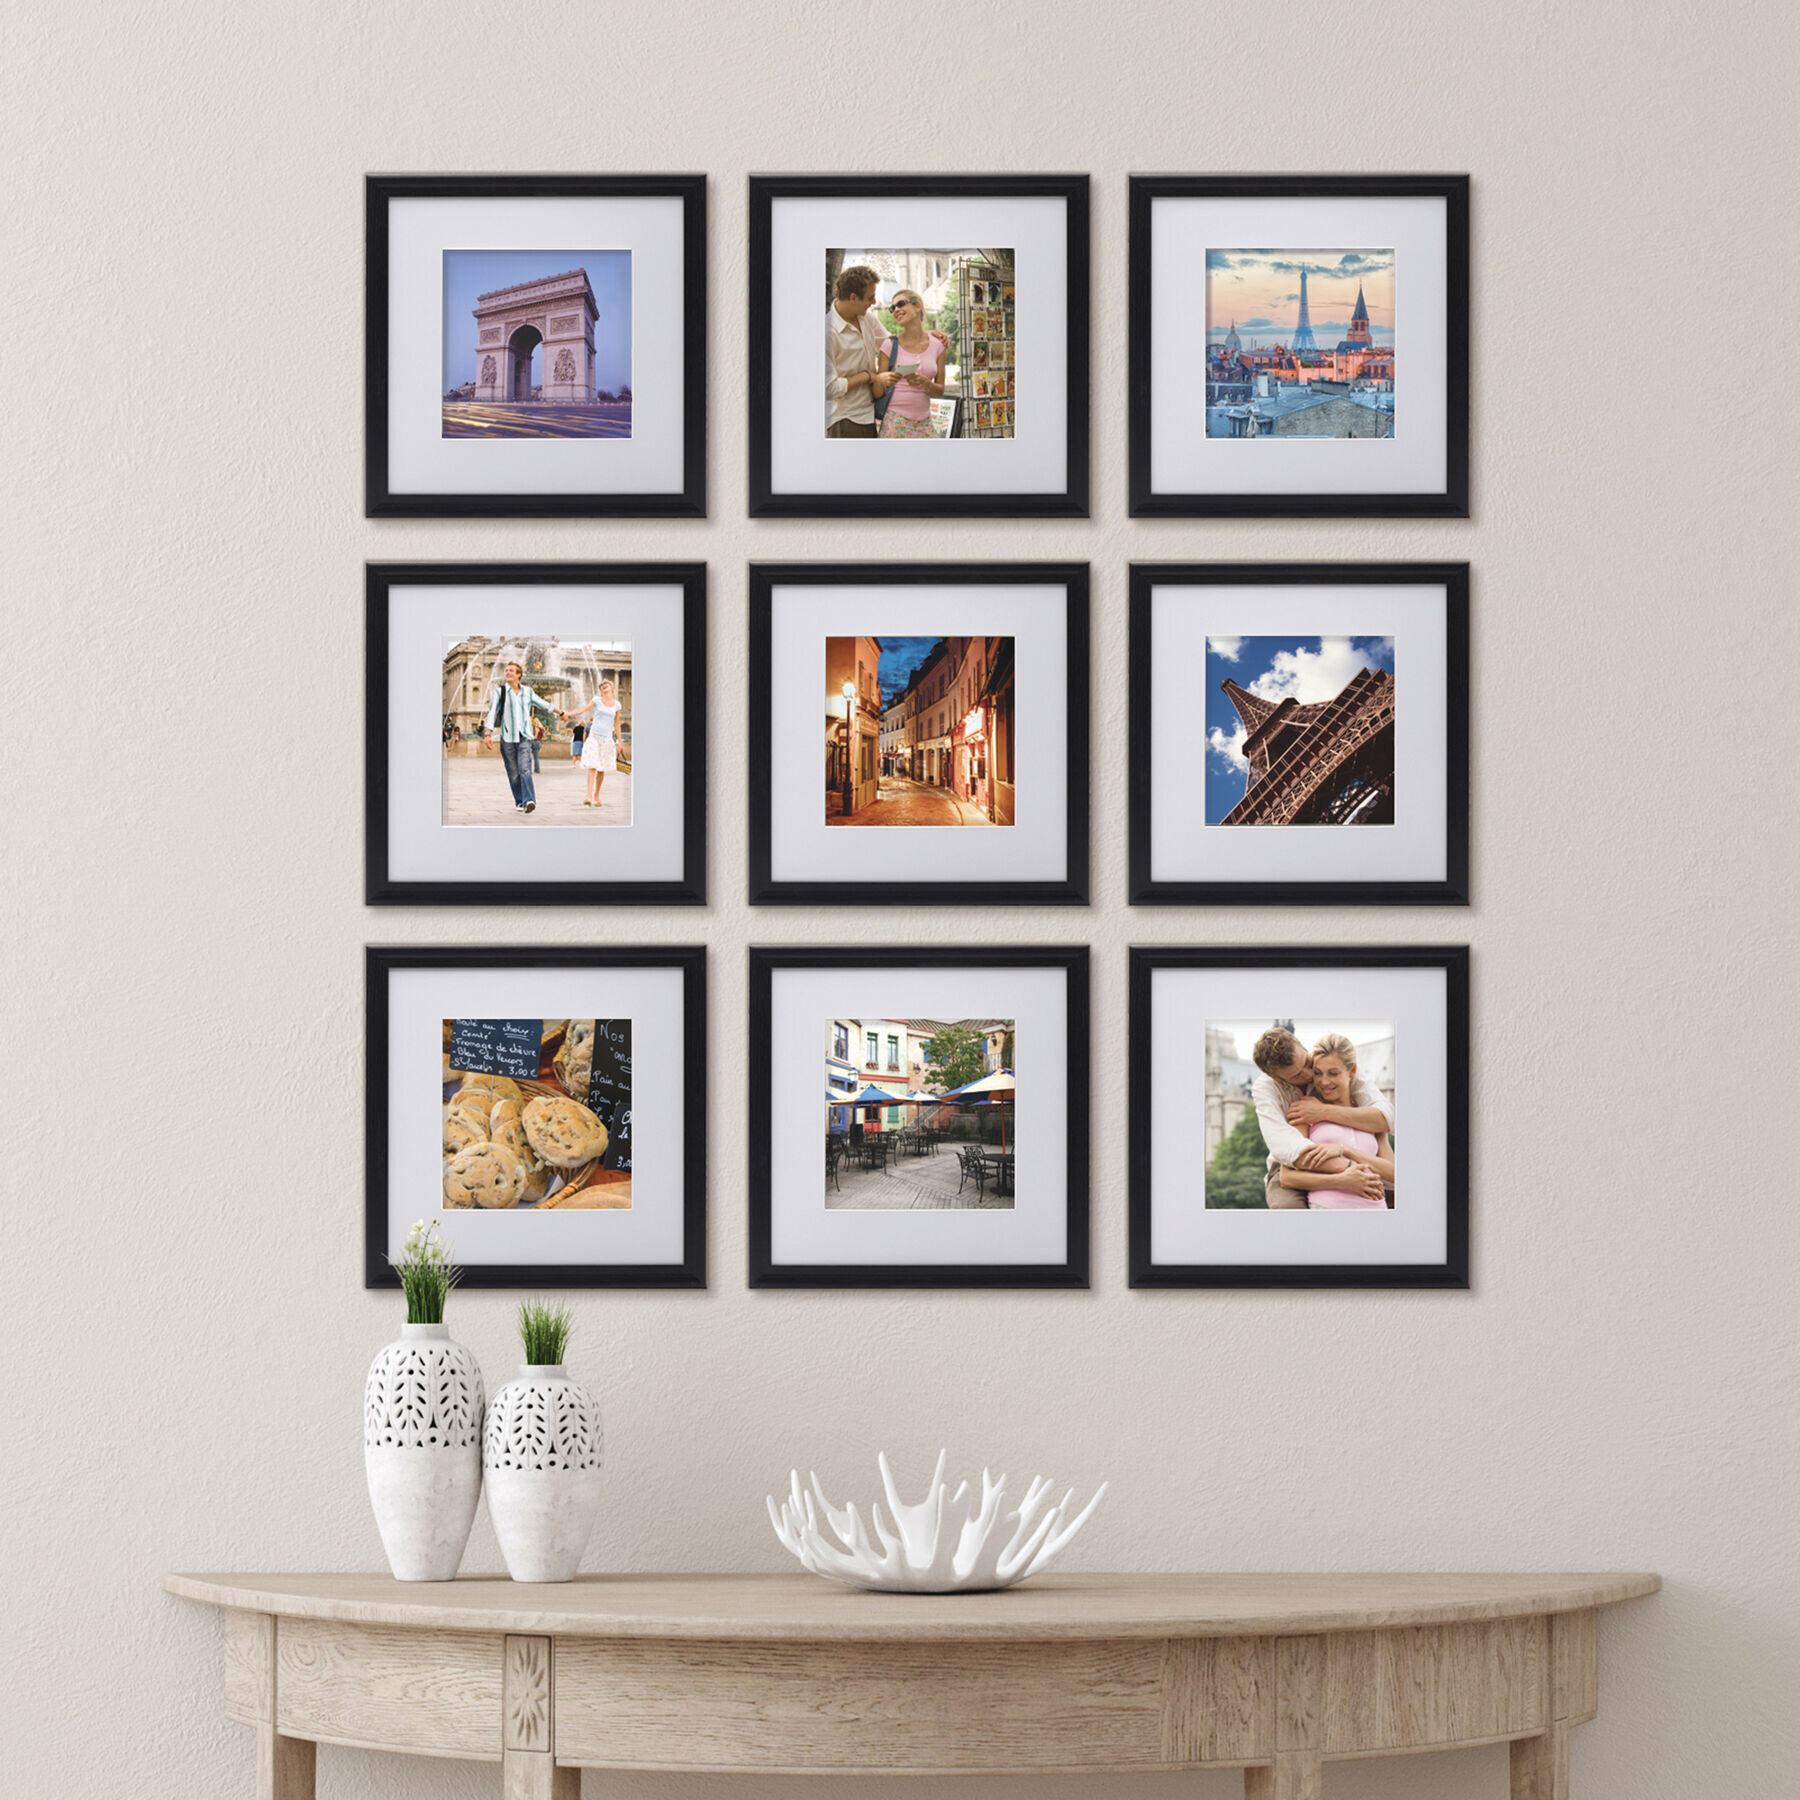 9 Piece Gallery Wall Frame Set, 12x12 in. Matted to 8x8 in. (Light